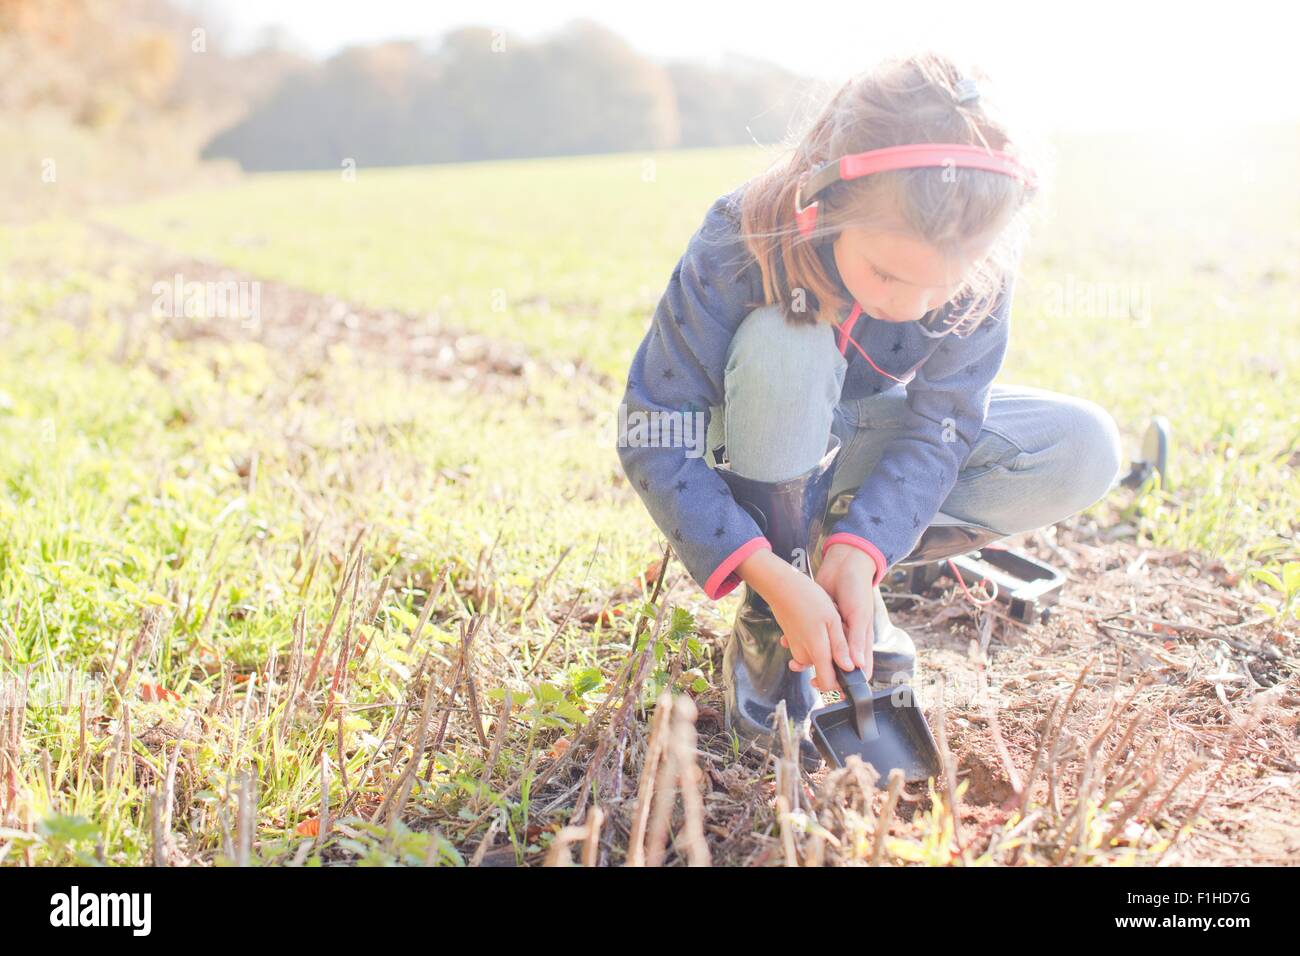 Girl with metal detector crouching and digging with spade in field Stock Photo